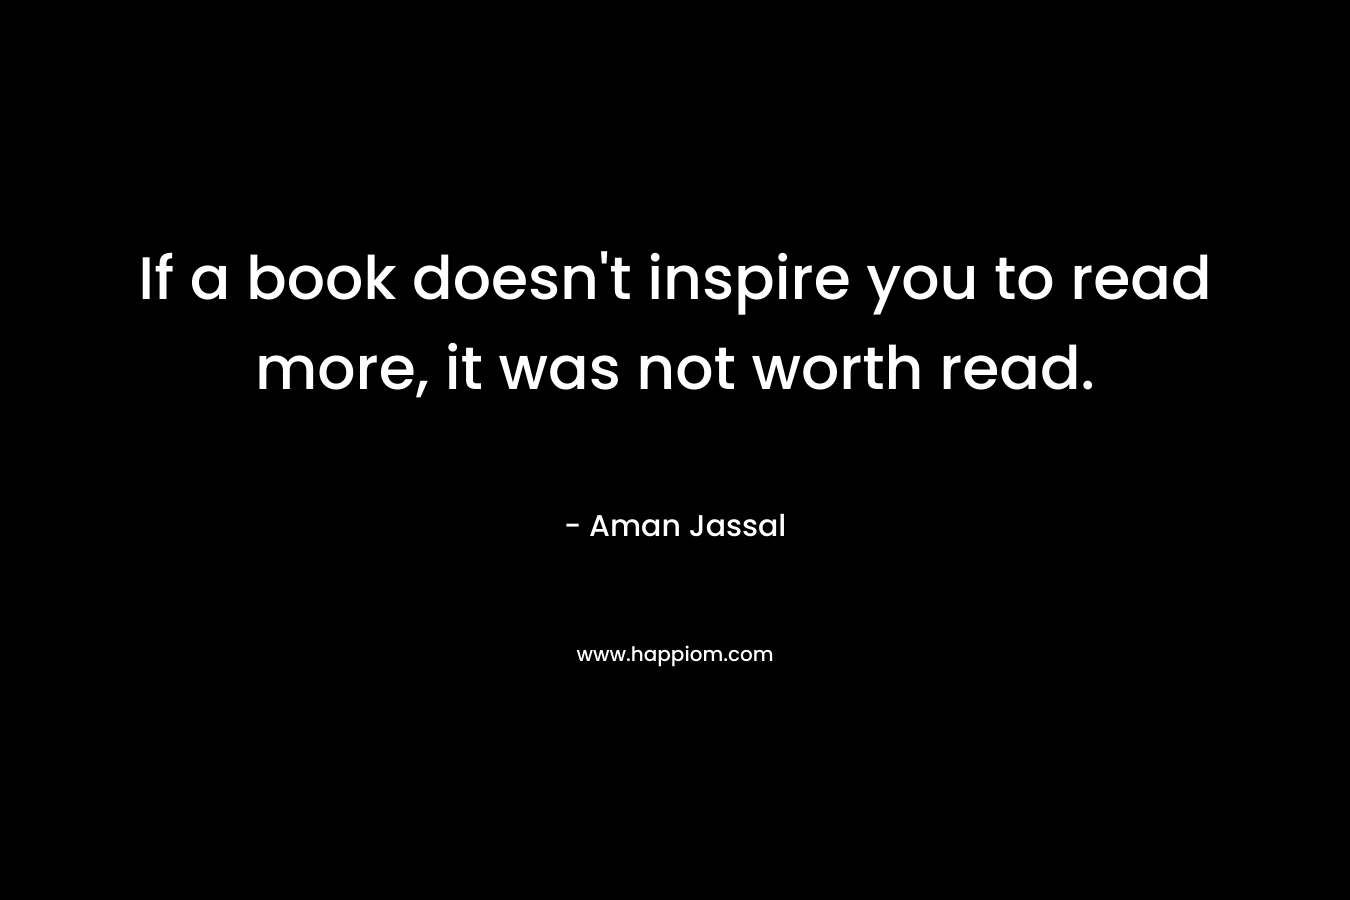 If a book doesn't inspire you to read more, it was not worth read.